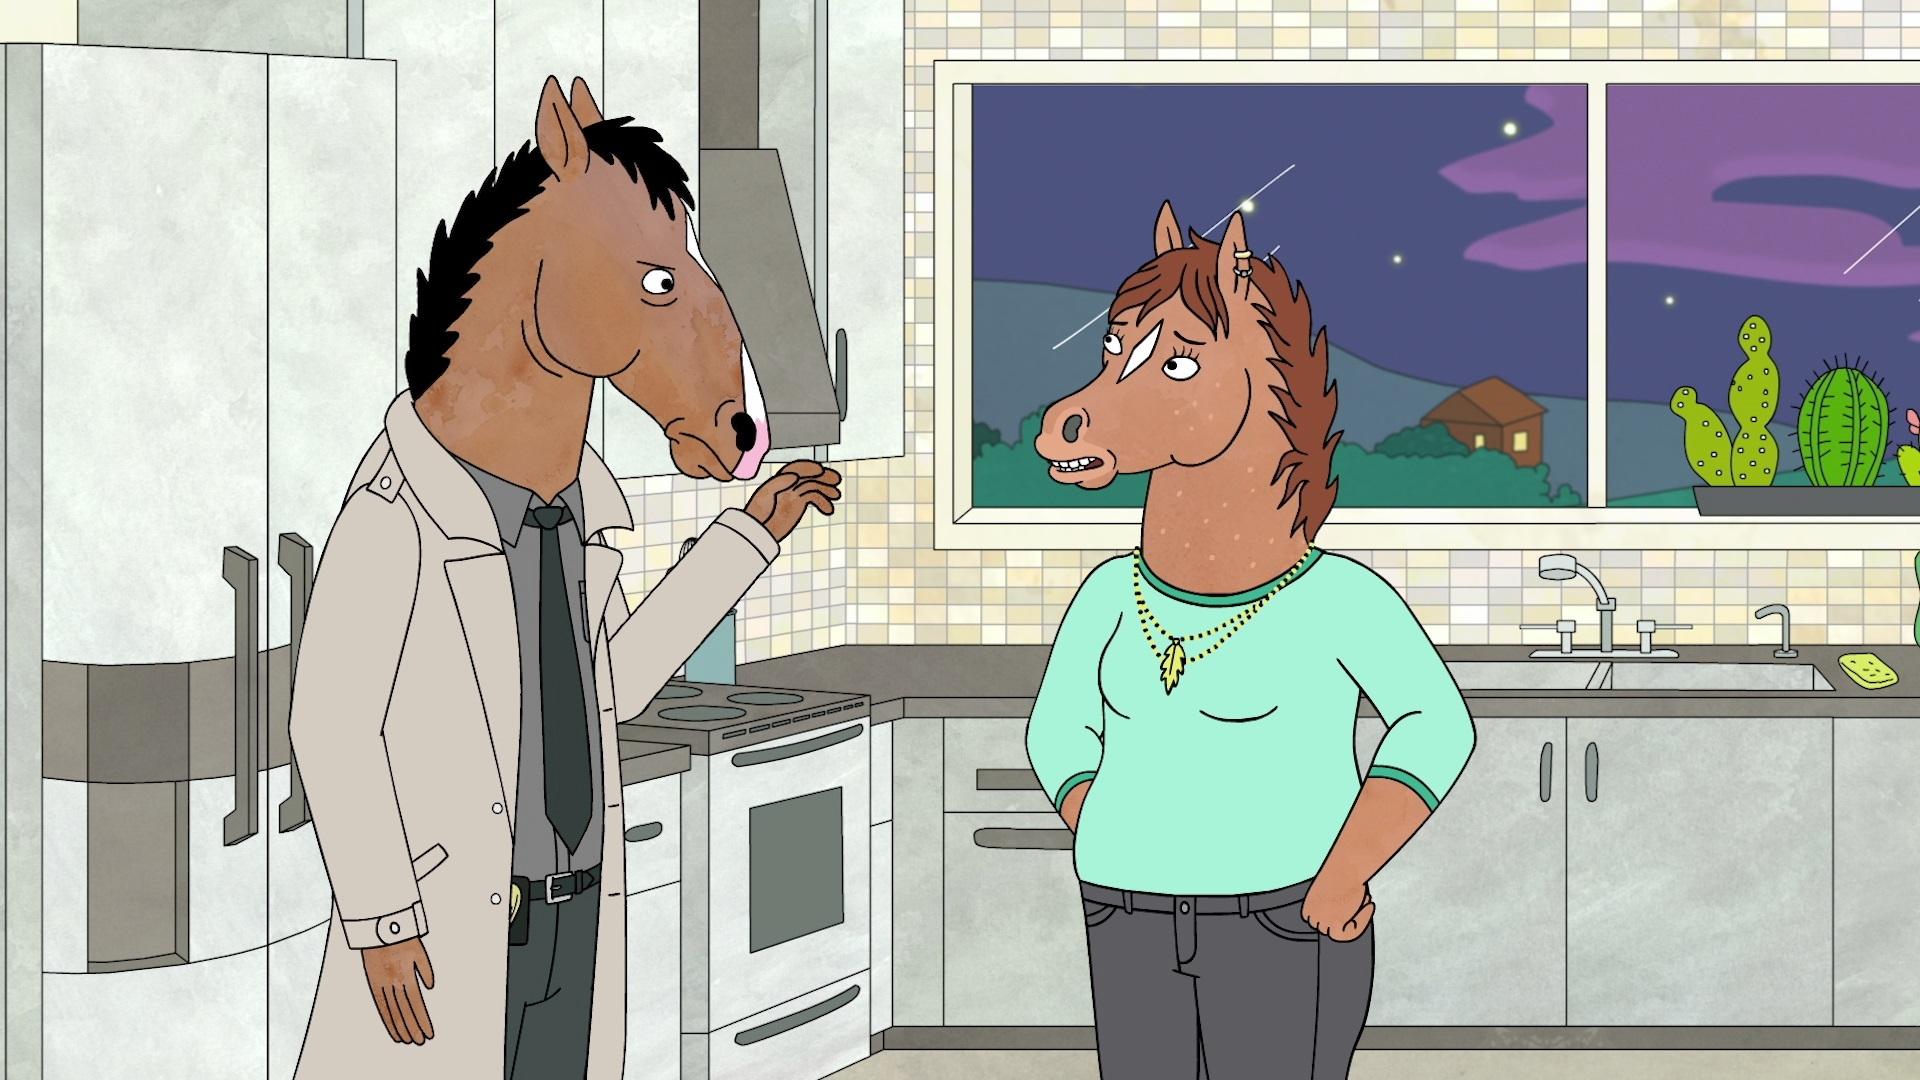 BoJack Horseman- A humanoid horse, seeks a comeback after years of self-loathing and drinking.